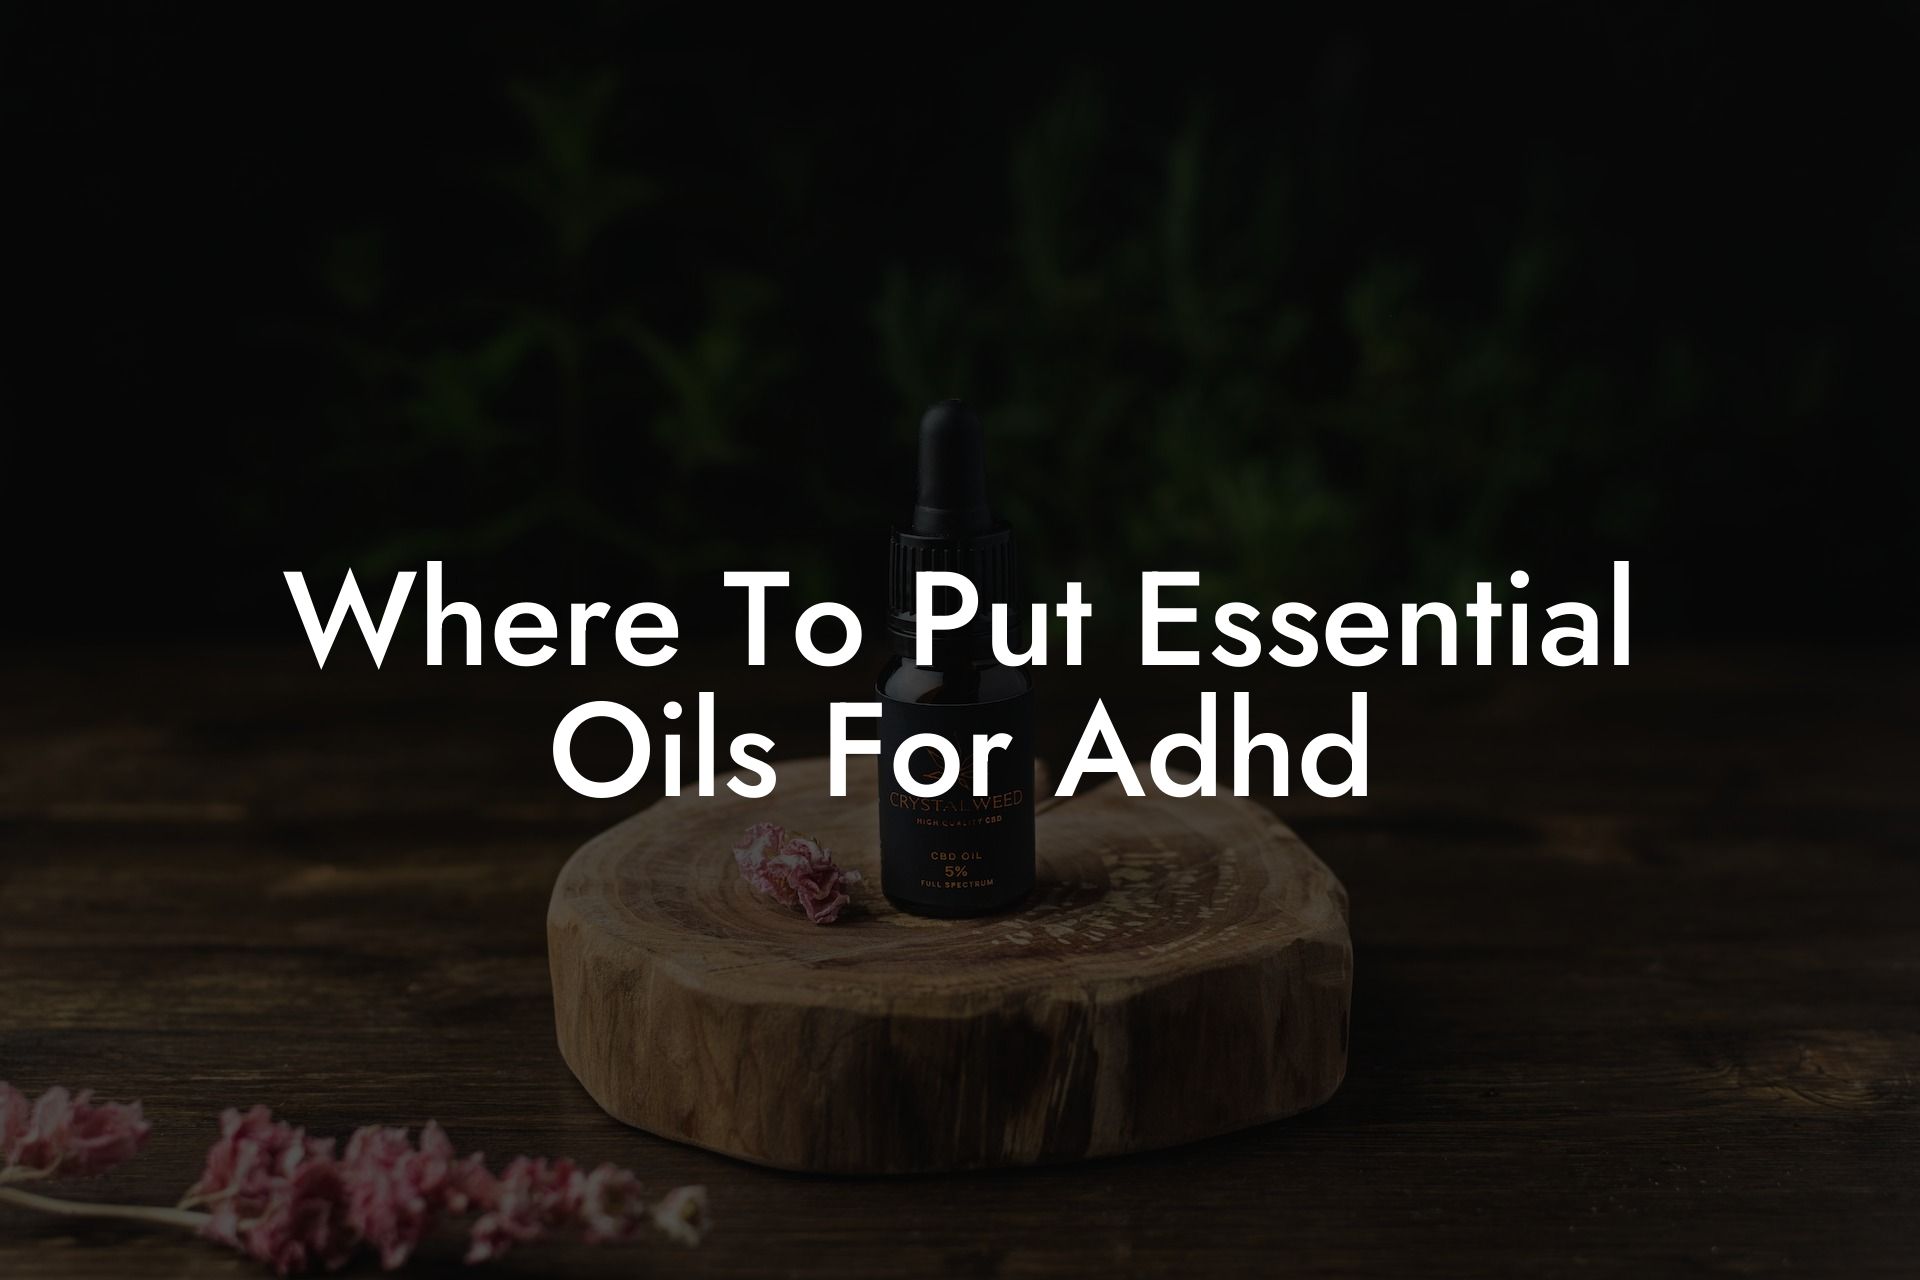 Where To Put Essential Oils For Adhd